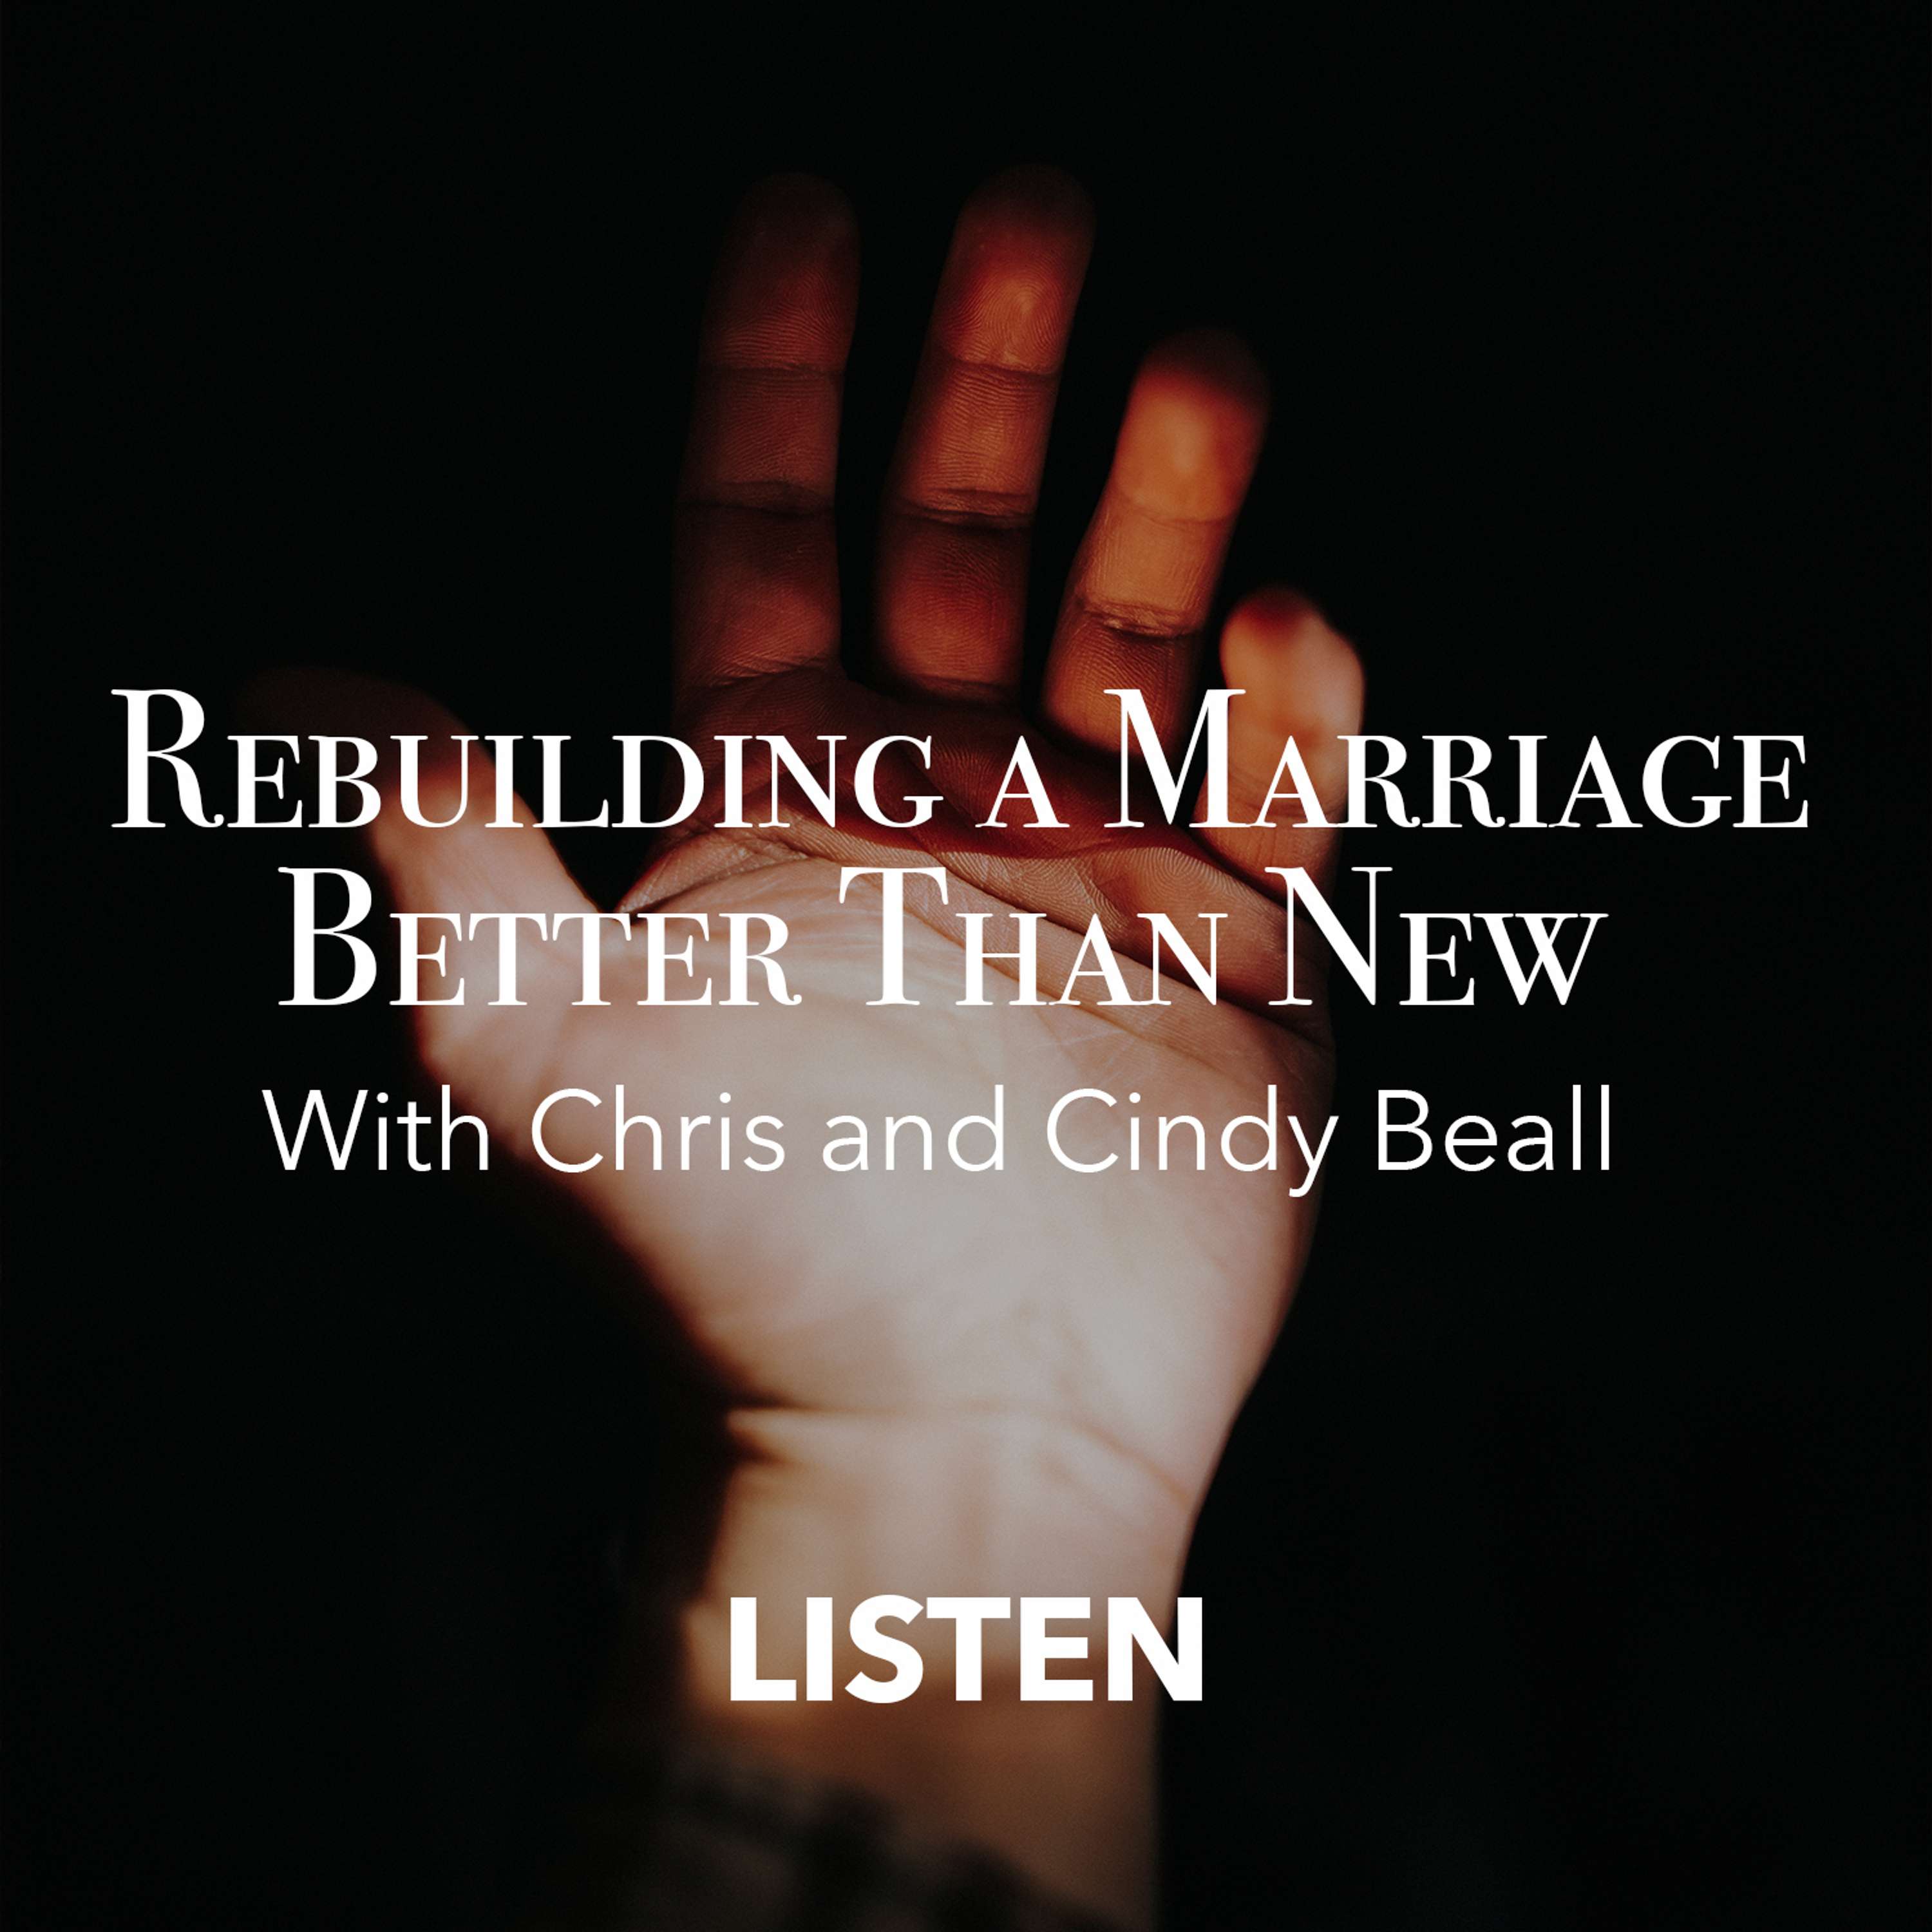 Rebuilding a Marriage Better Than New (Part 1) - Chris and Cindy Beall